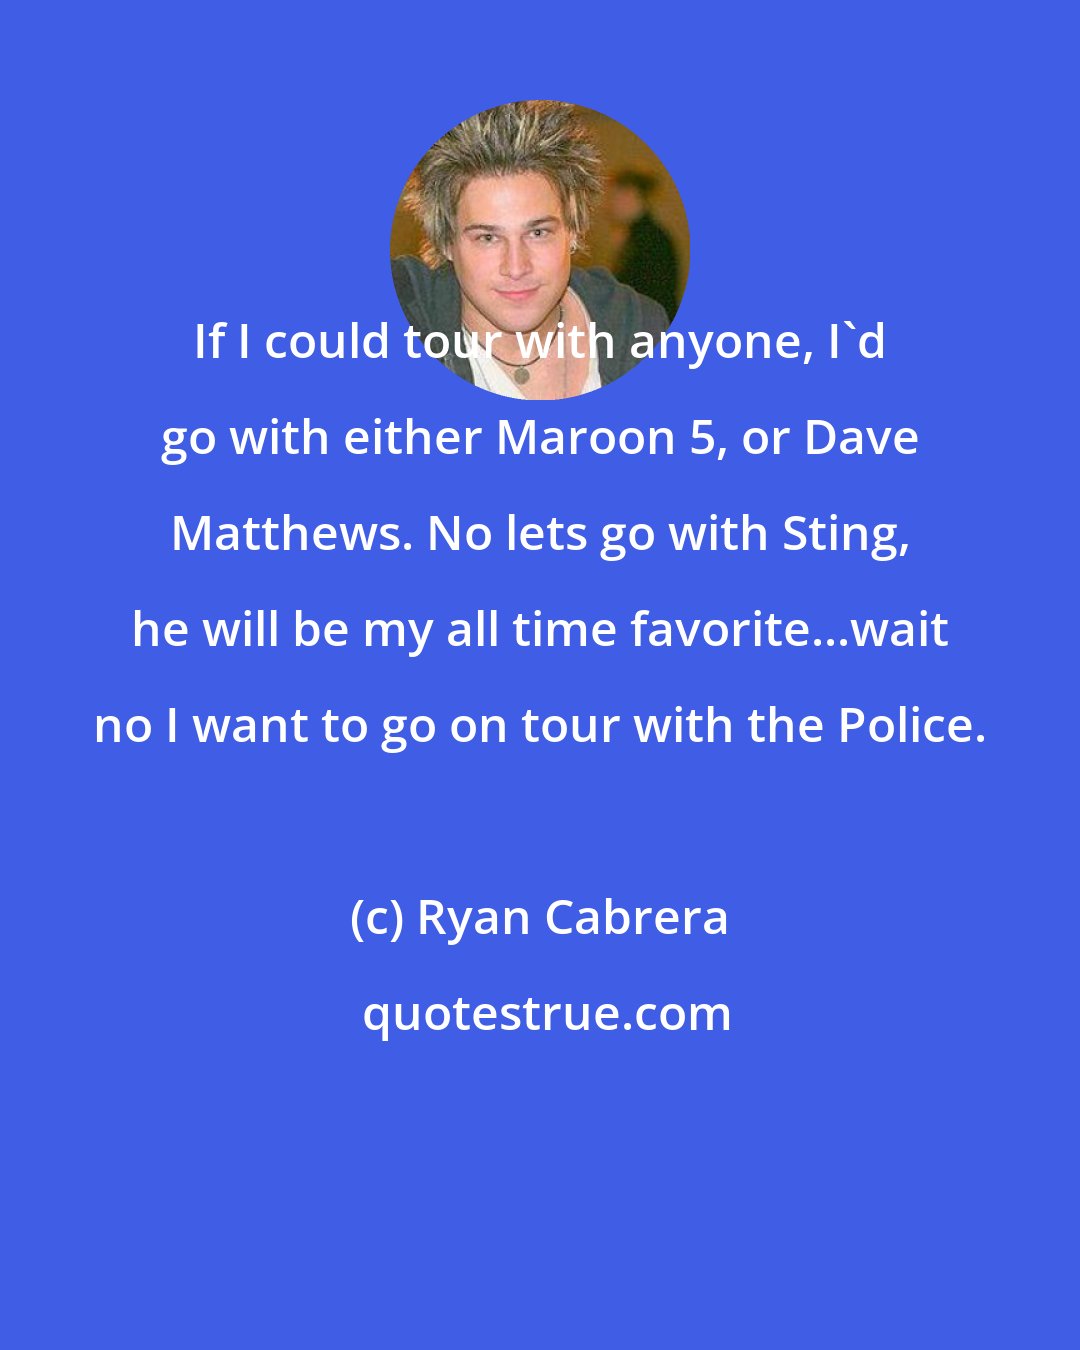 Ryan Cabrera: If I could tour with anyone, I'd go with either Maroon 5, or Dave Matthews. No lets go with Sting, he will be my all time favorite...wait no I want to go on tour with the Police.